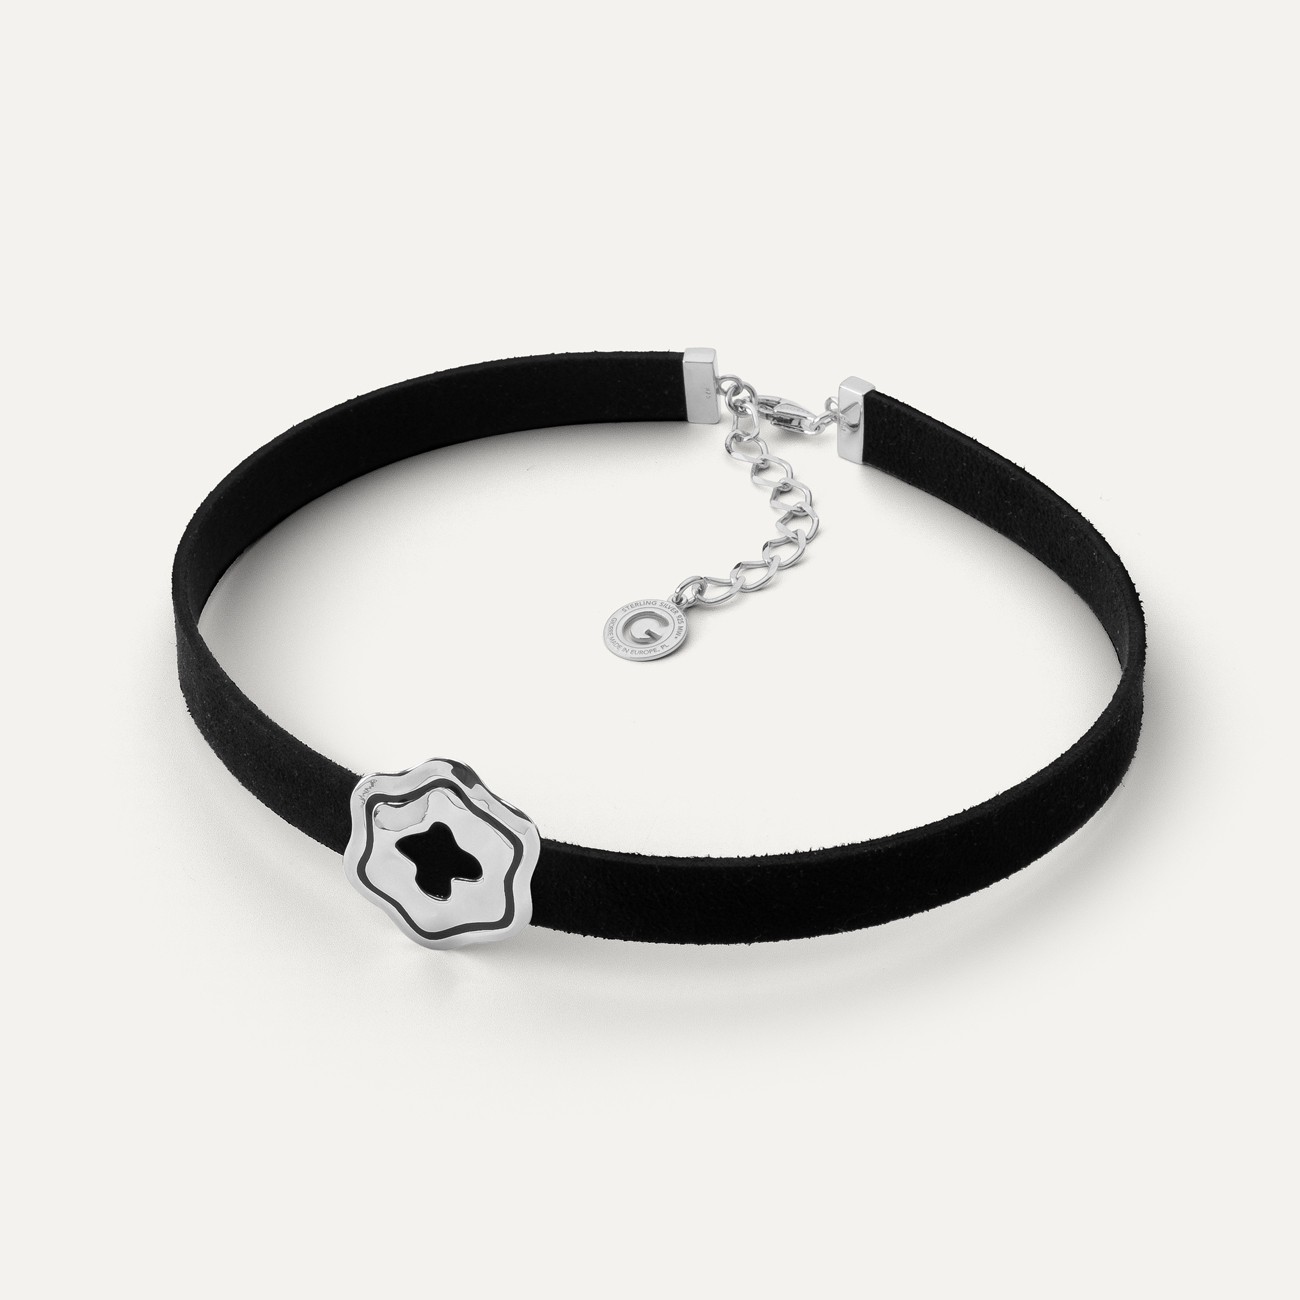 Choker with silver flower - black resin, sterling silver 925